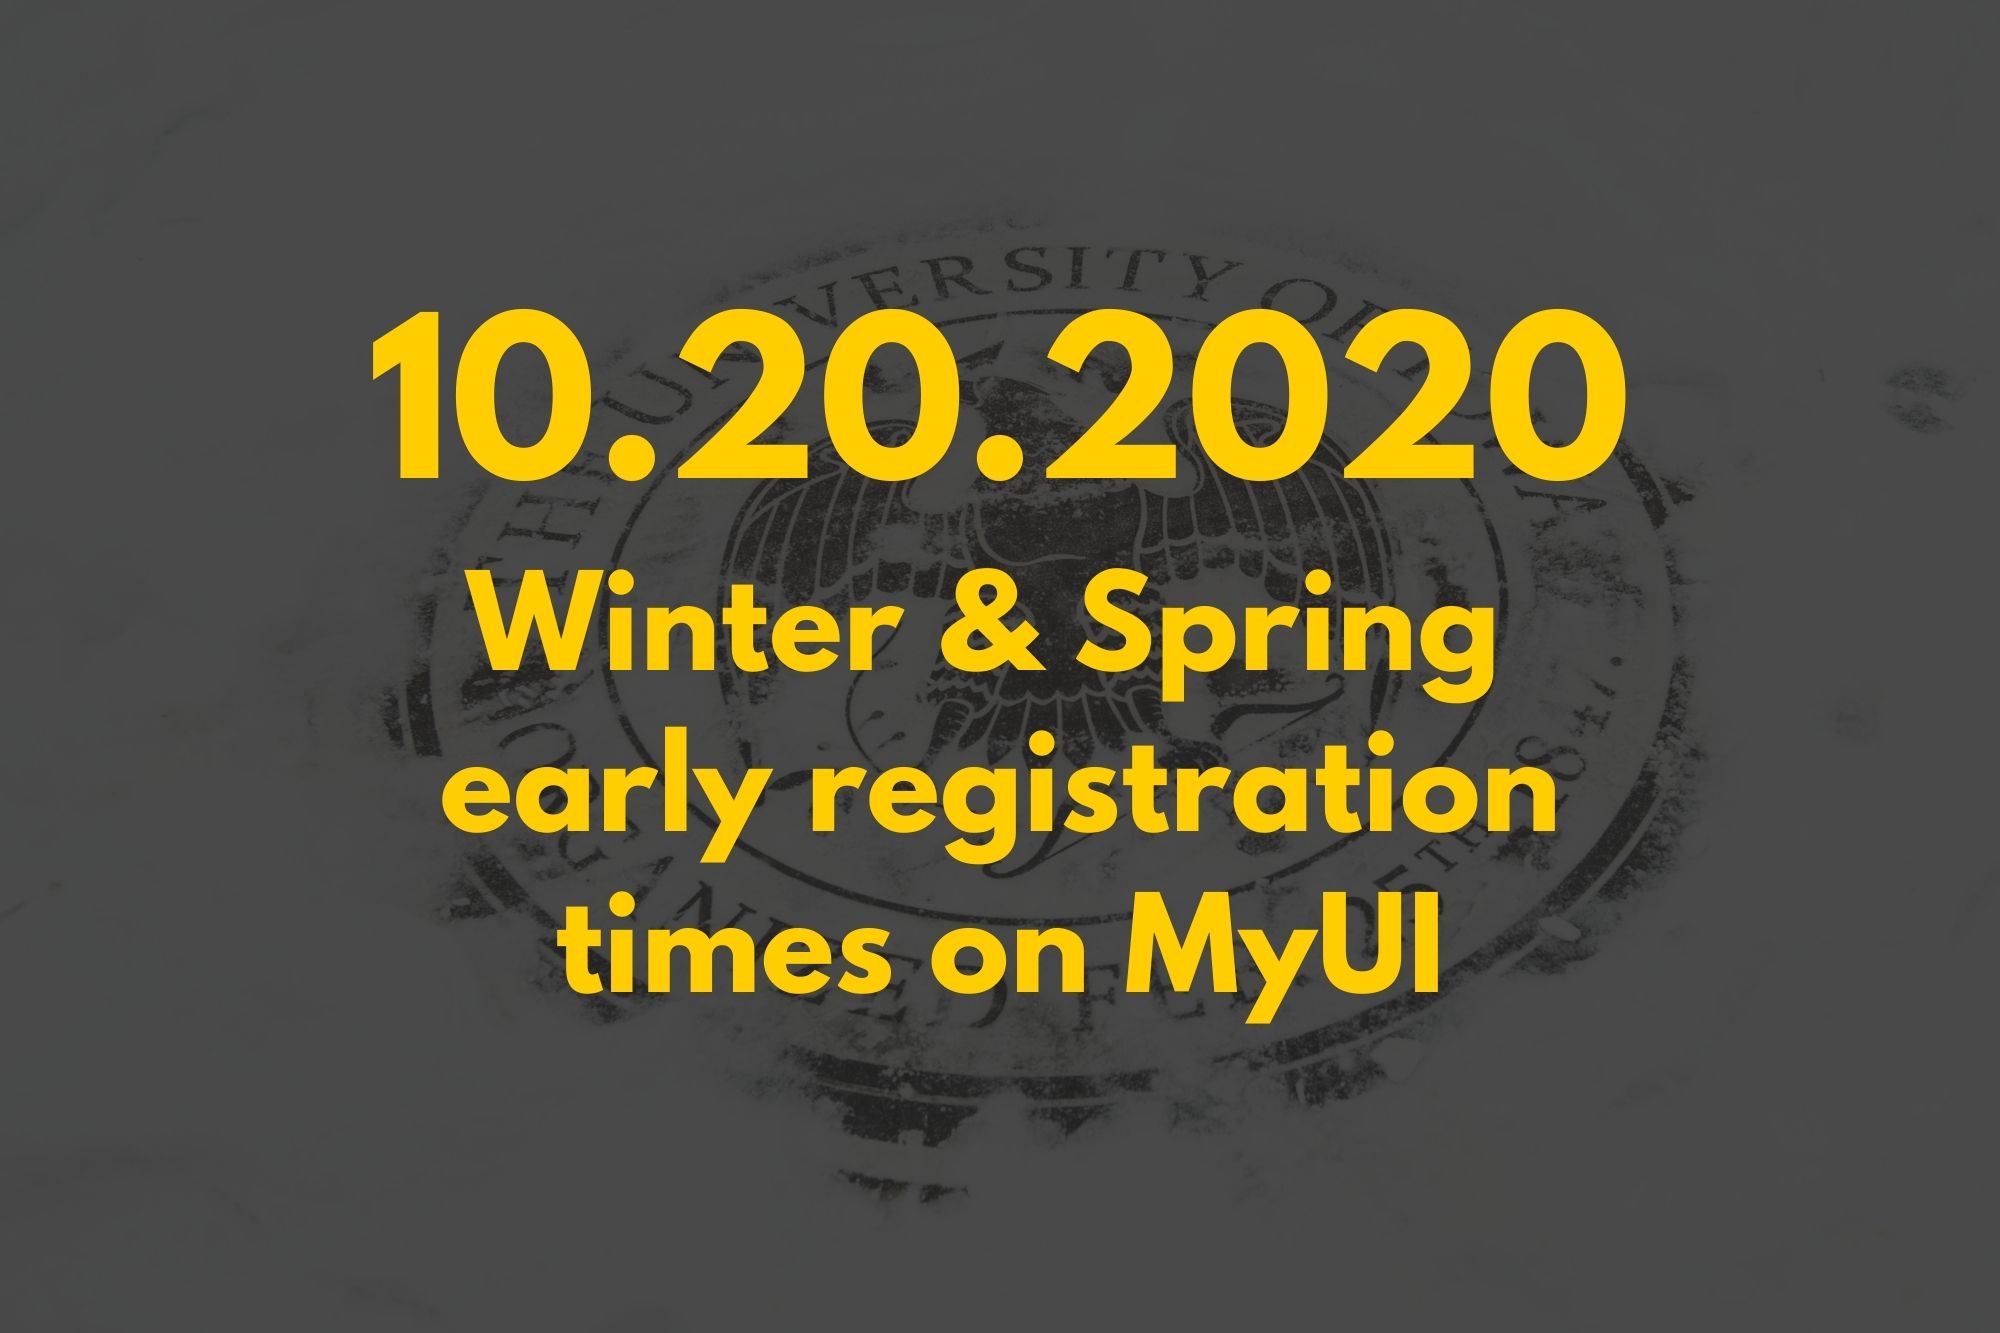 Winter/Spring early registration times on MyUI